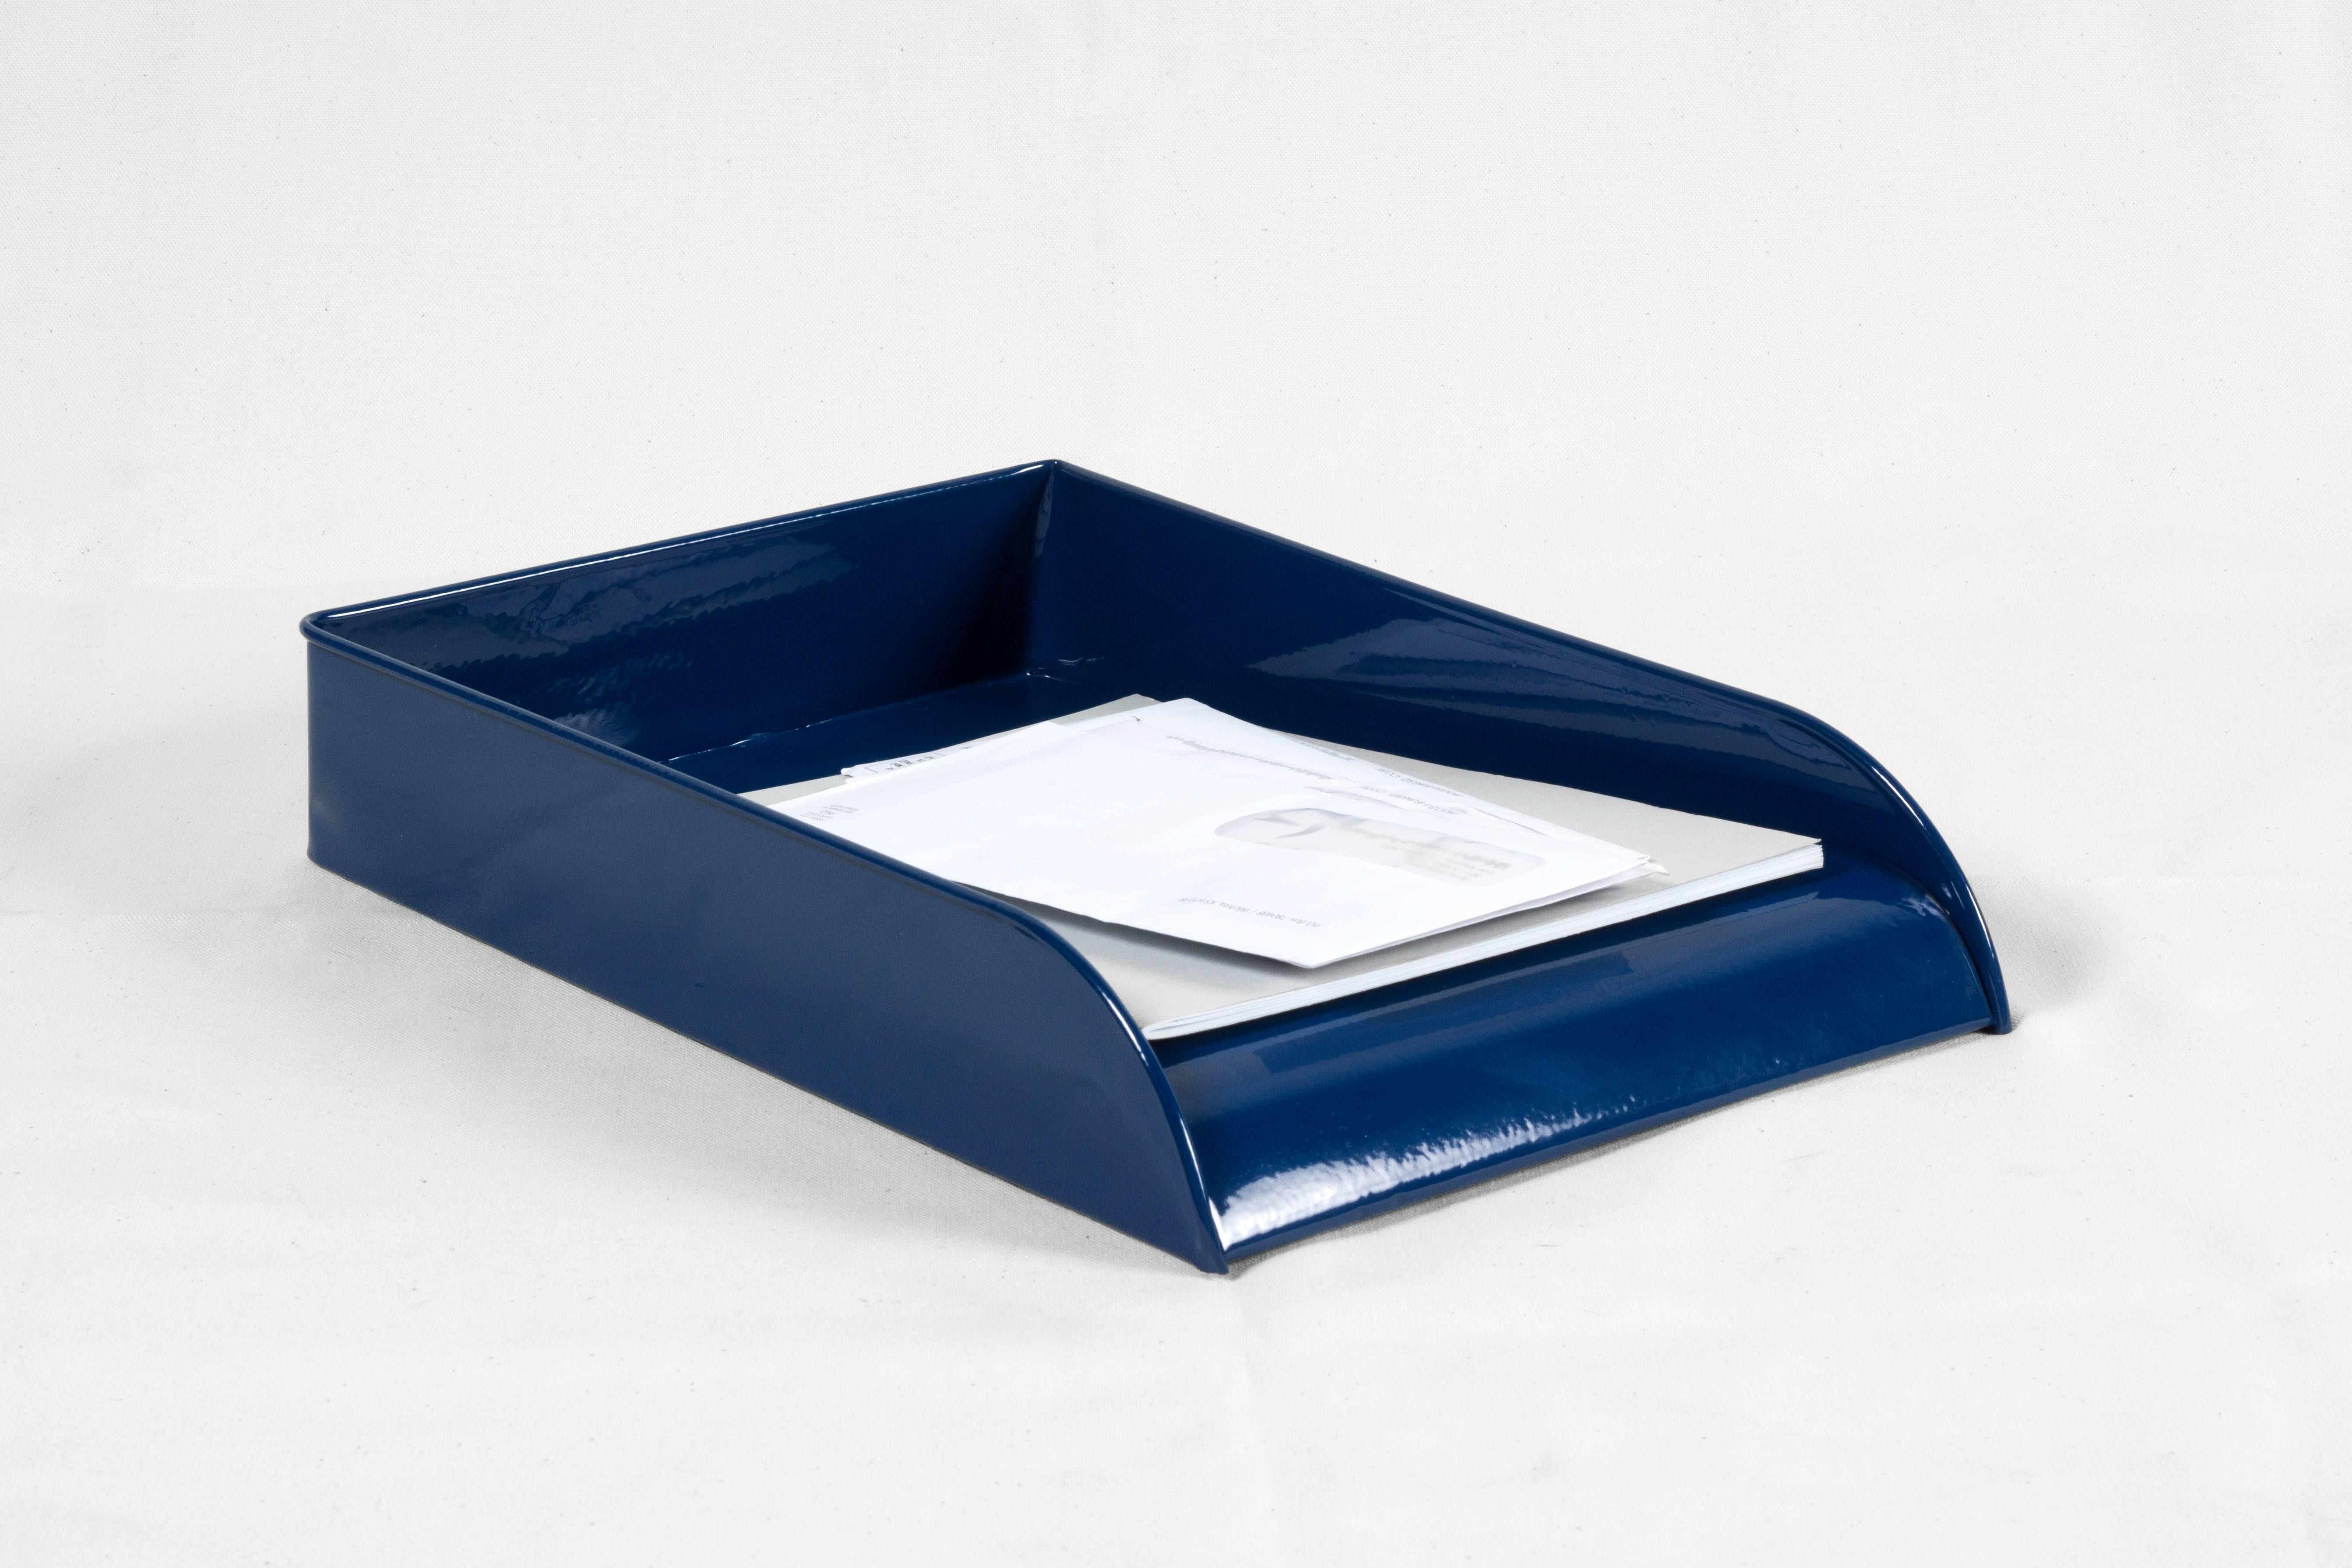 Vintage Art Deco office letter, memo or mail tray powder-coated in midnight blue. This uniquely finished organizational piece is sure to keep your retro office in tip-top shape.

Dimensions: 15